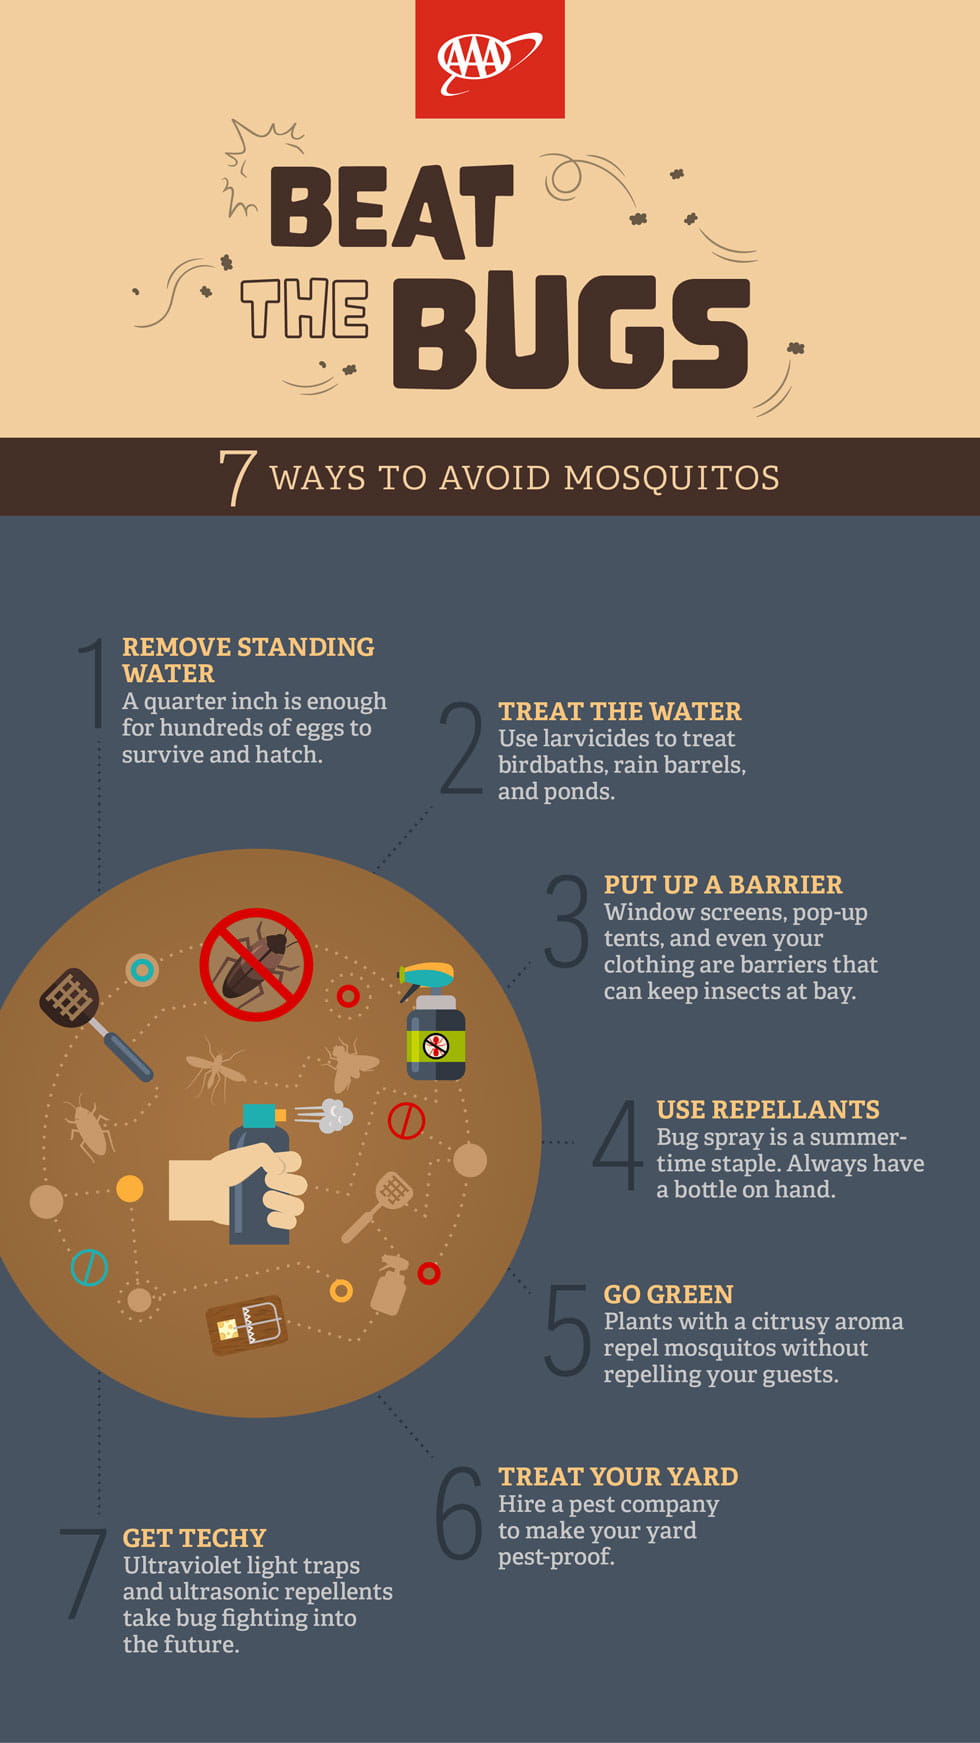 Beat the bugs infographic